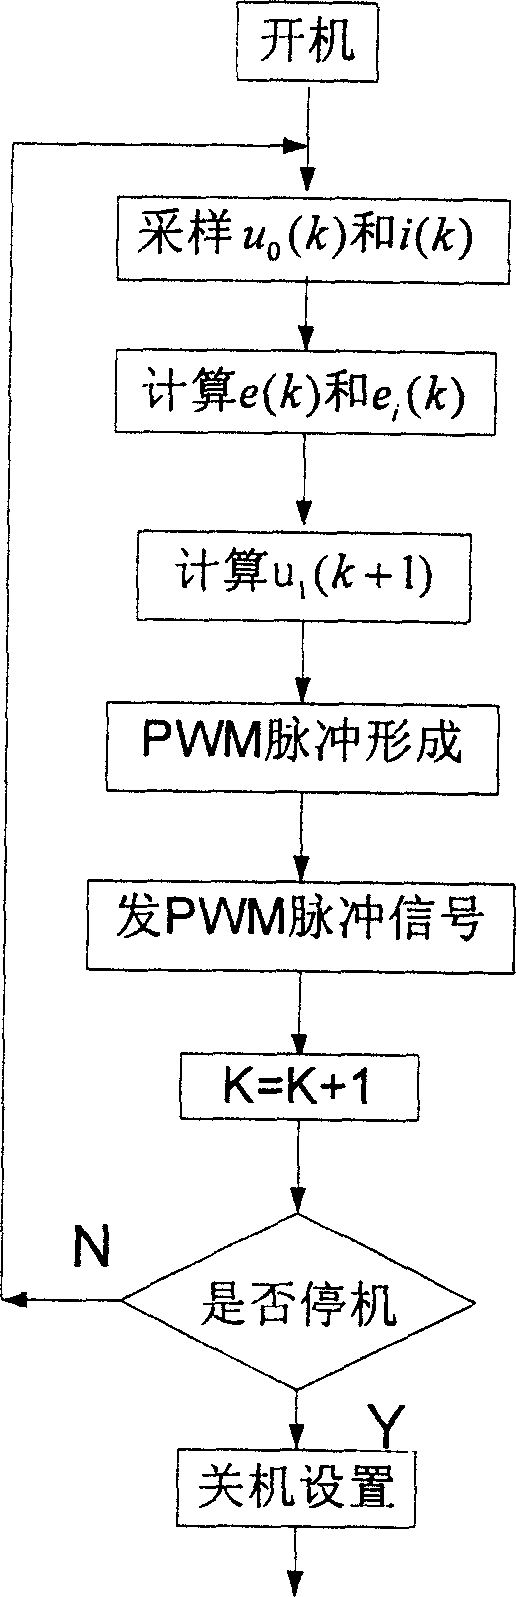 Digital controlled inverter and its control method